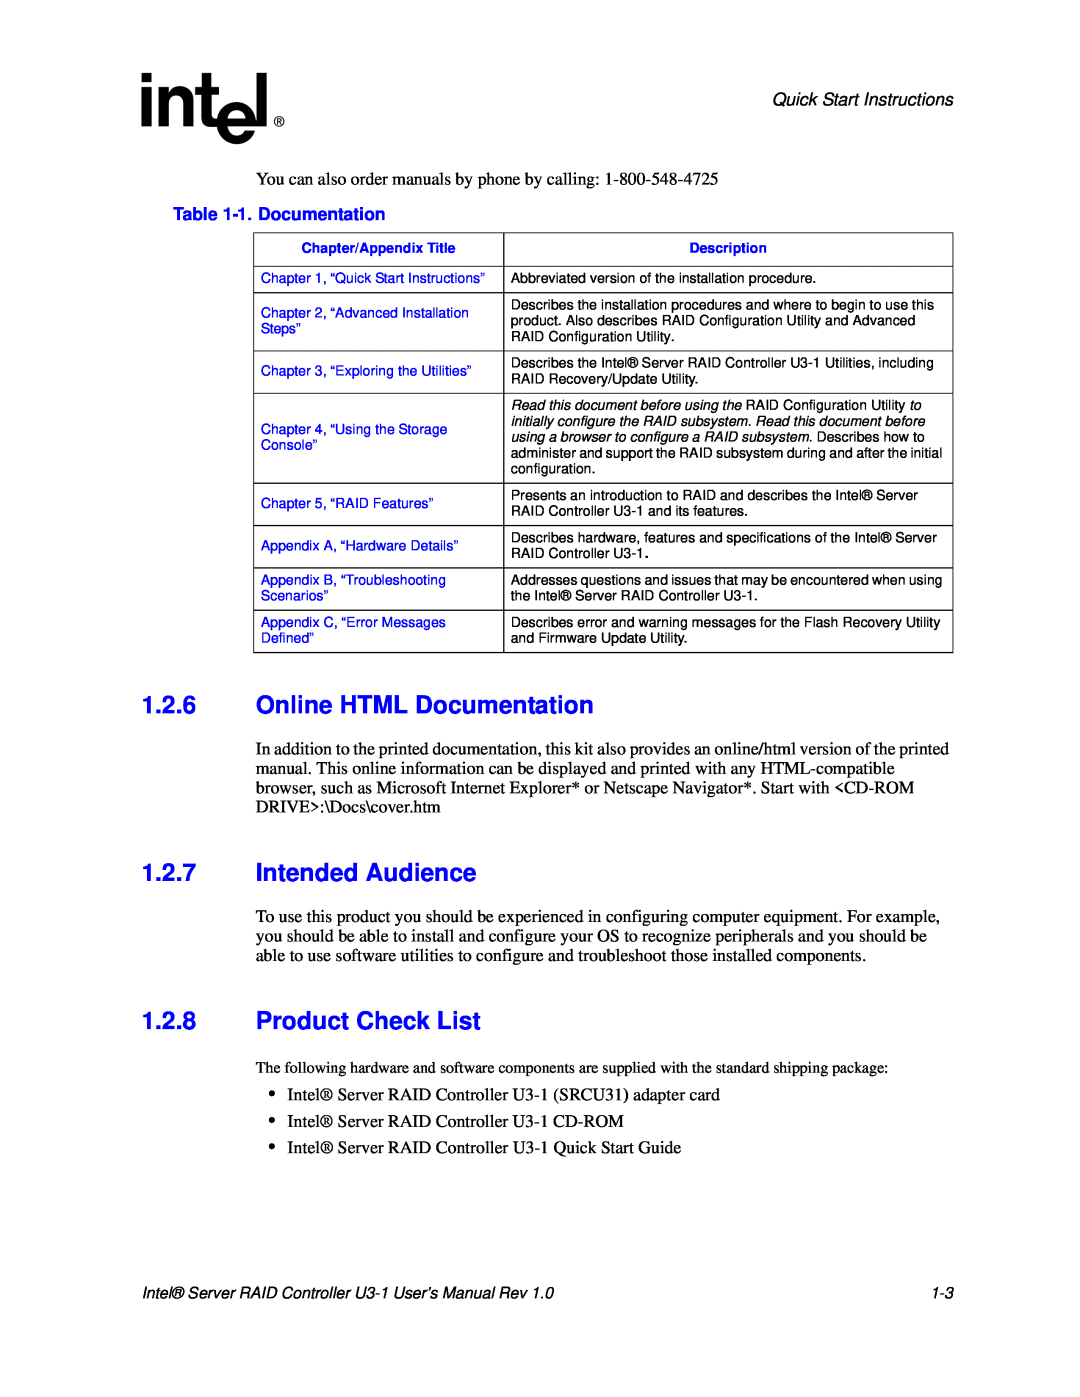 Intel SRCU31 user manual 1.2.6Online HTML Documentation, 1.2.7Intended Audience, 1.2.8Product Check List, 1.Documentation 